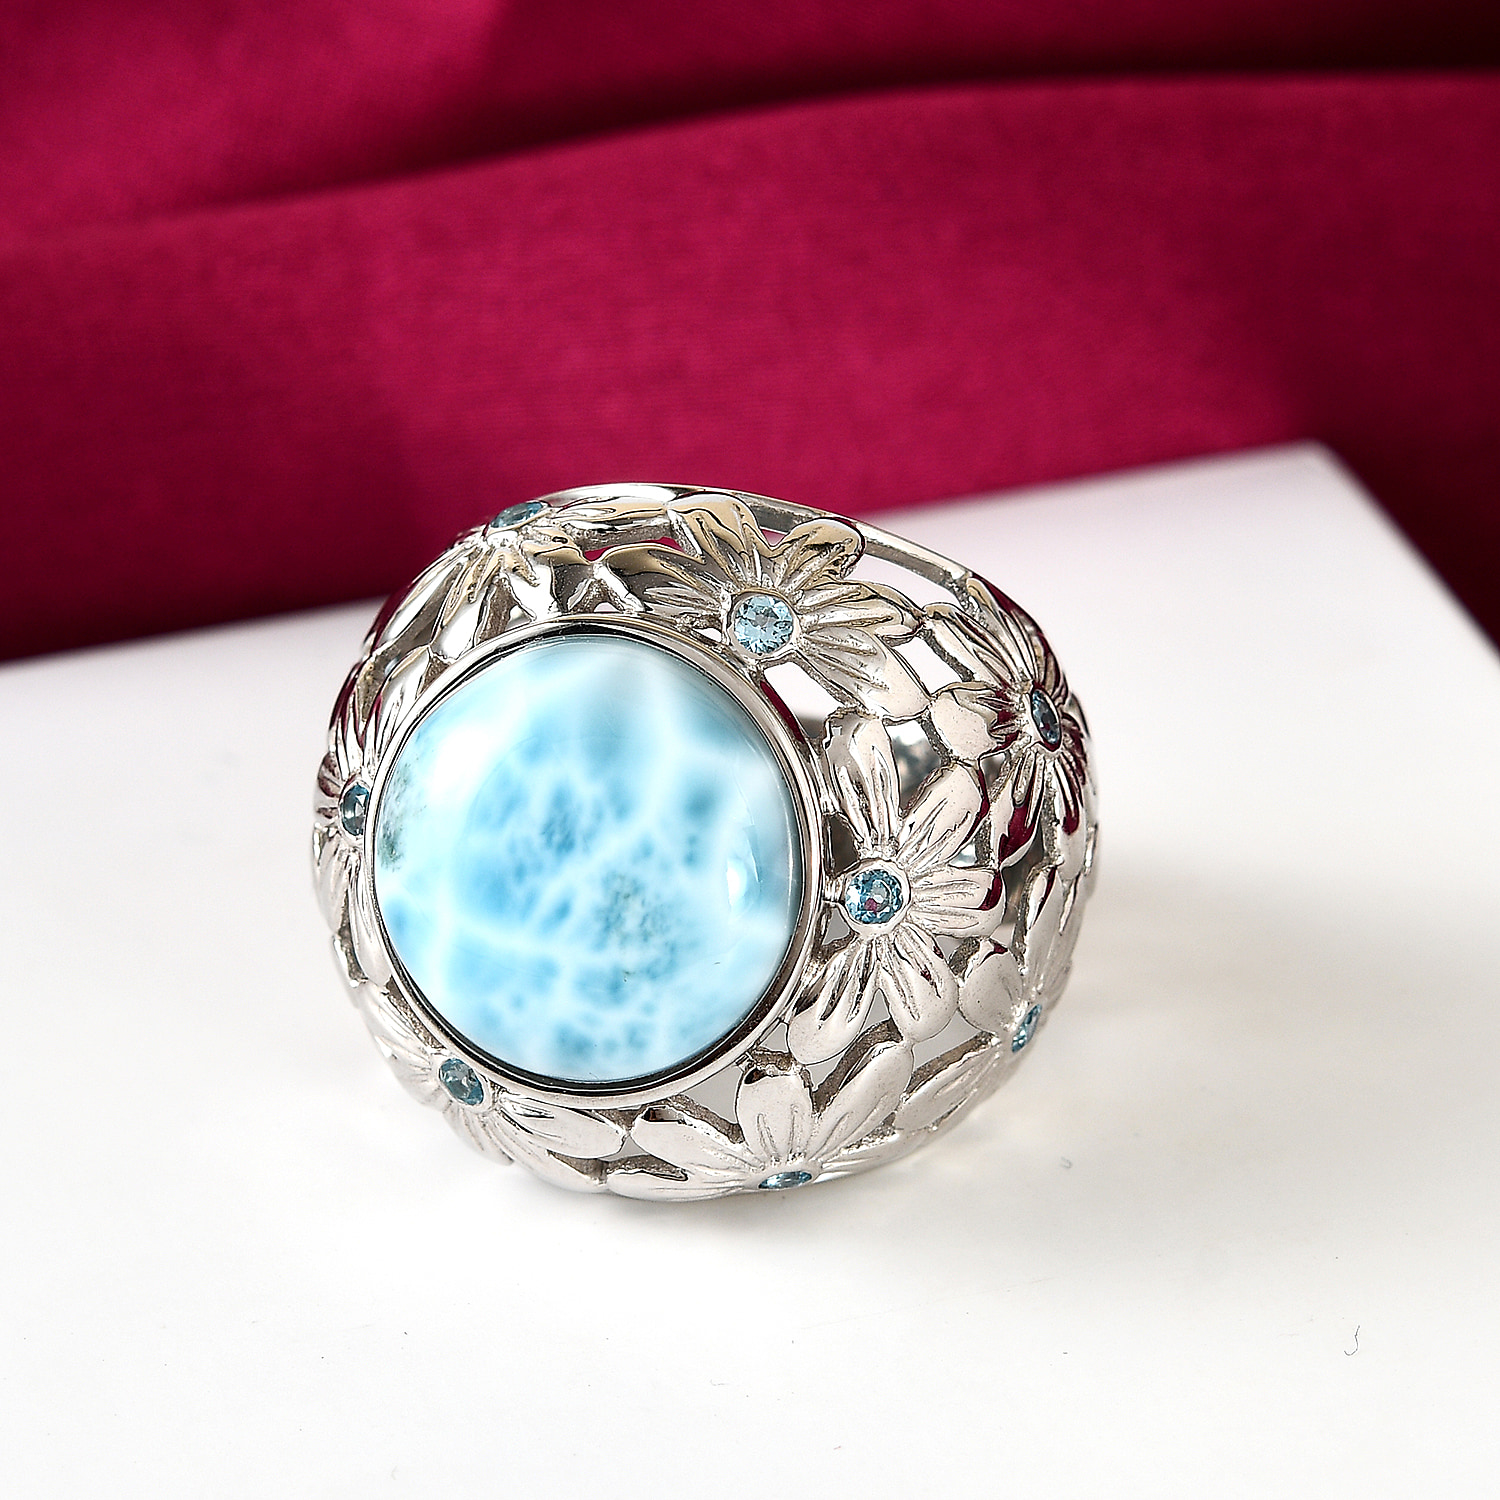 Sajen Silver Cultural Flair Collection - 11 Ct. Larimar and Blue Topaz Floral Ring in Sterling Silver